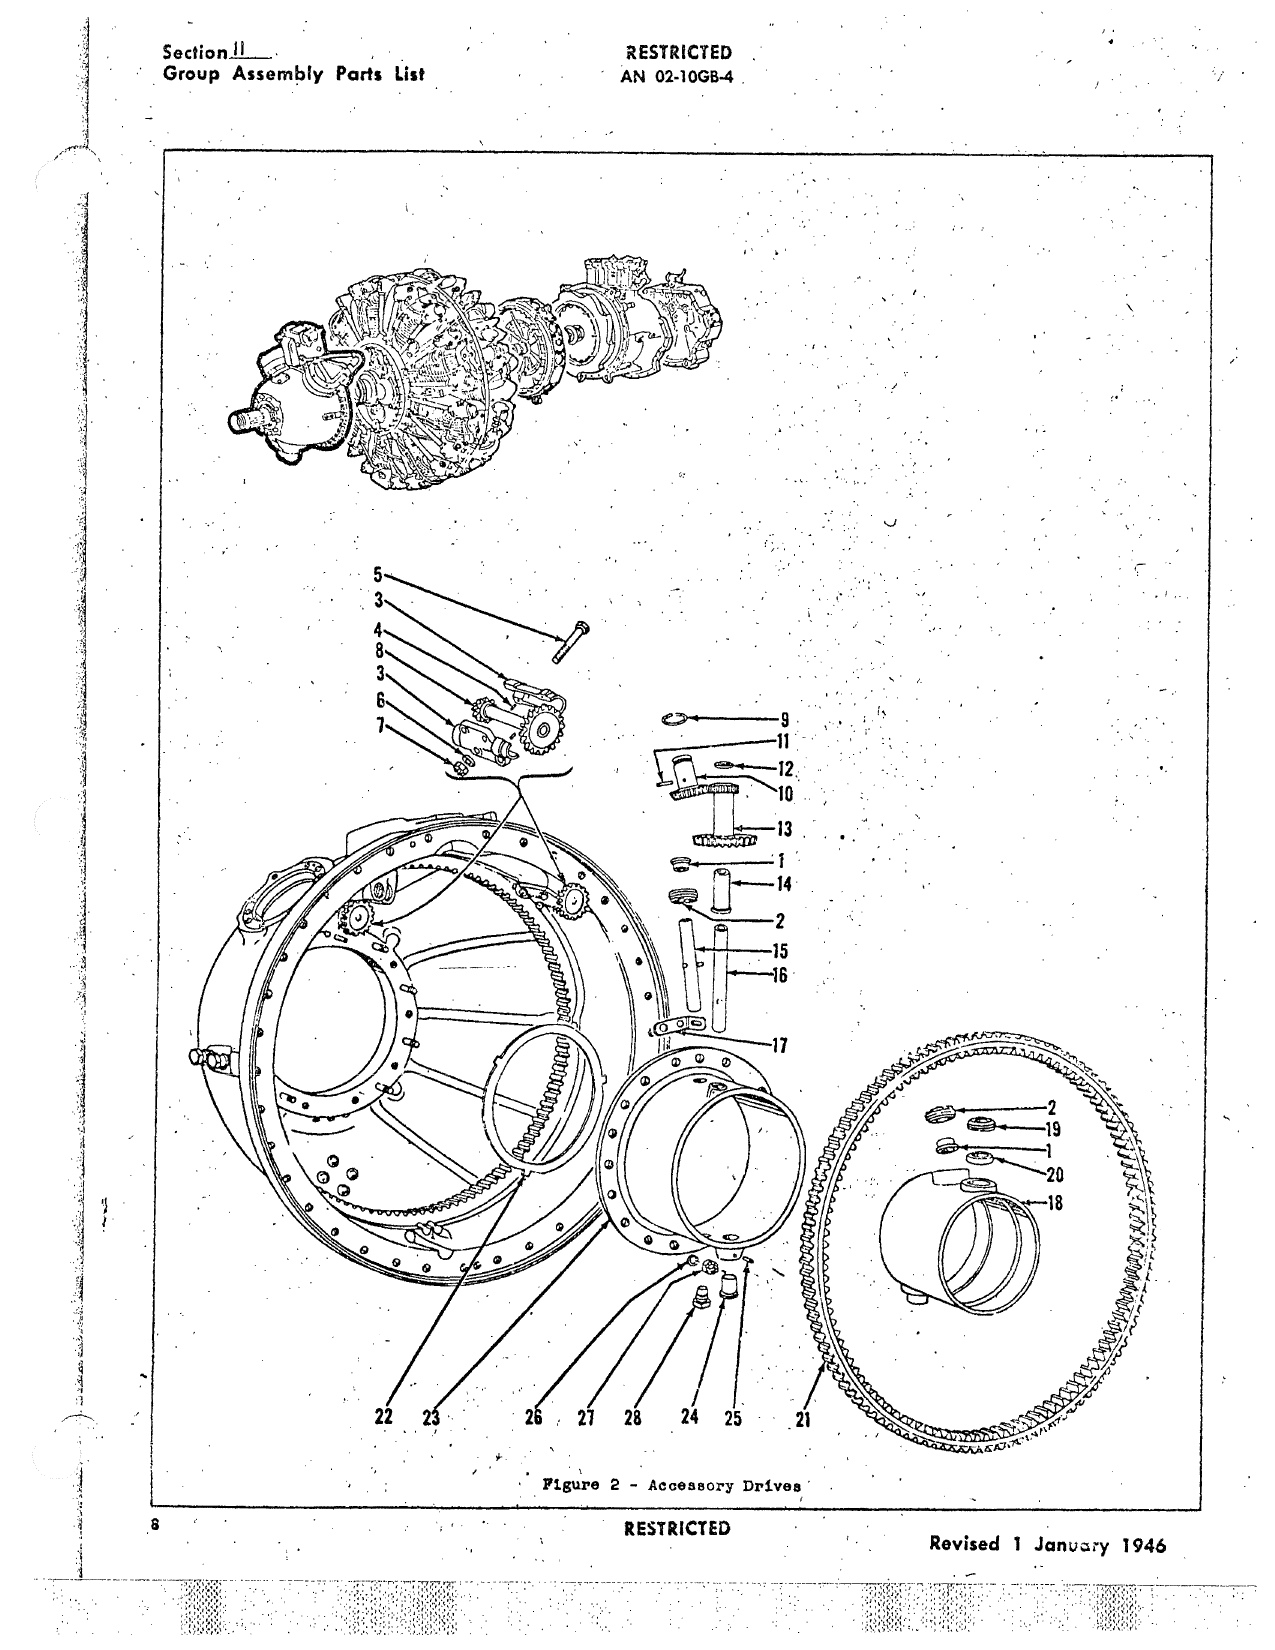 Sample page 12 from AirCorps Library document: Parts Catalog for Aircraft Engine Models R-2800-8, -8W, -10, -10W, and -65 